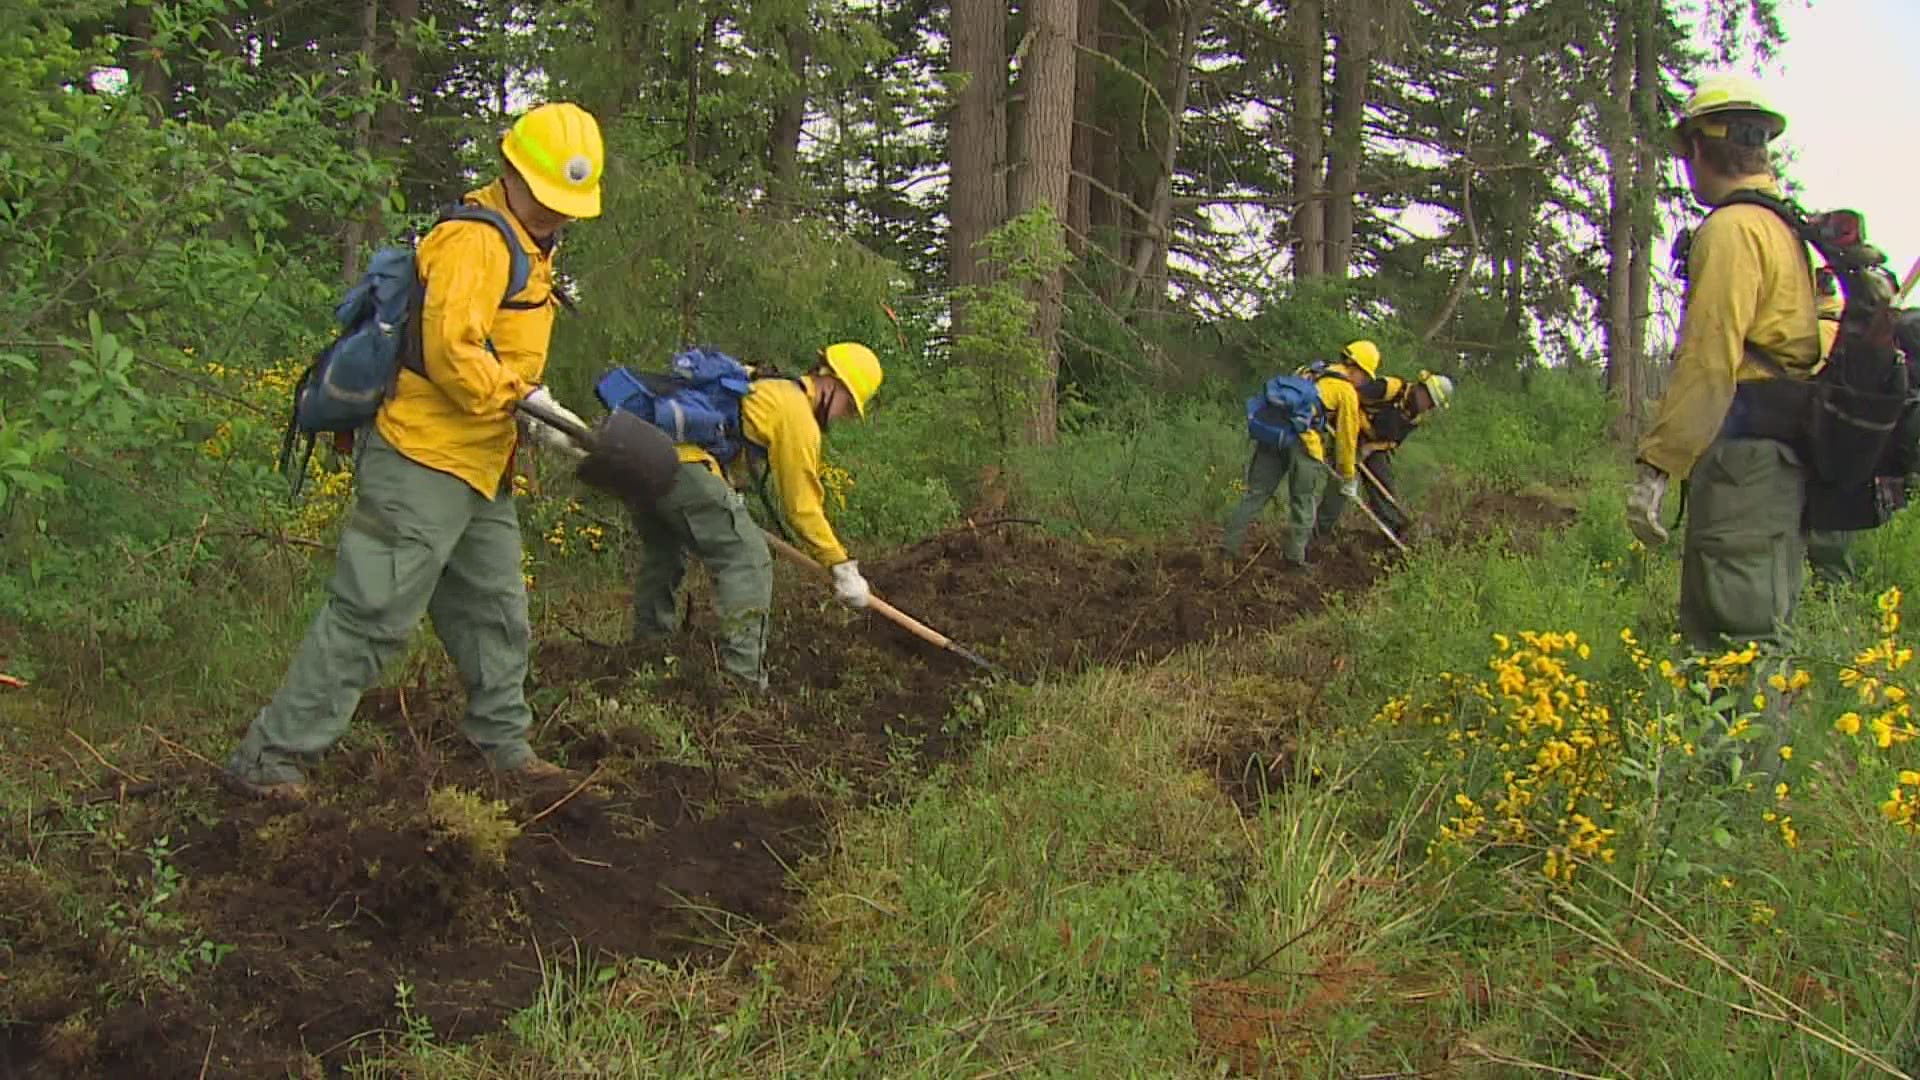 Two hundred members of the Washington National Guard are getting training to work the front lines of wildfires this season.